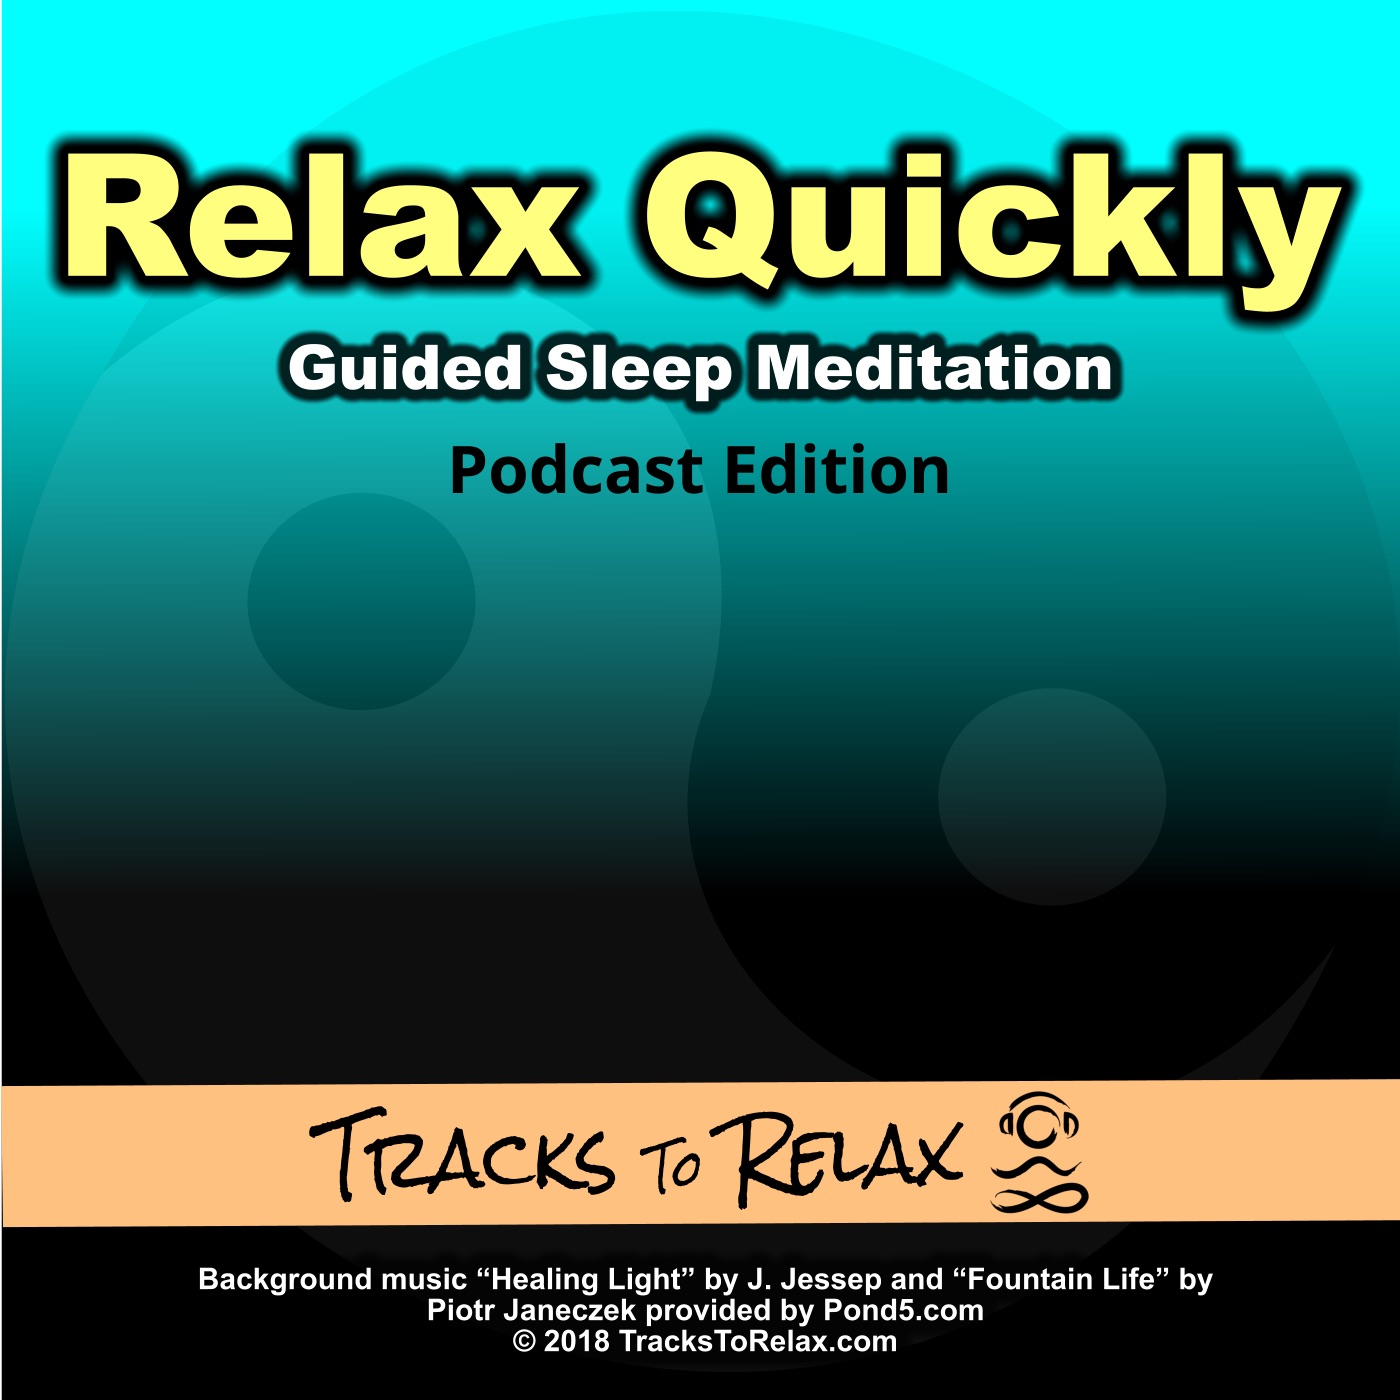 Relax Quickly At Bedtime - A Guided Sleep Meditation